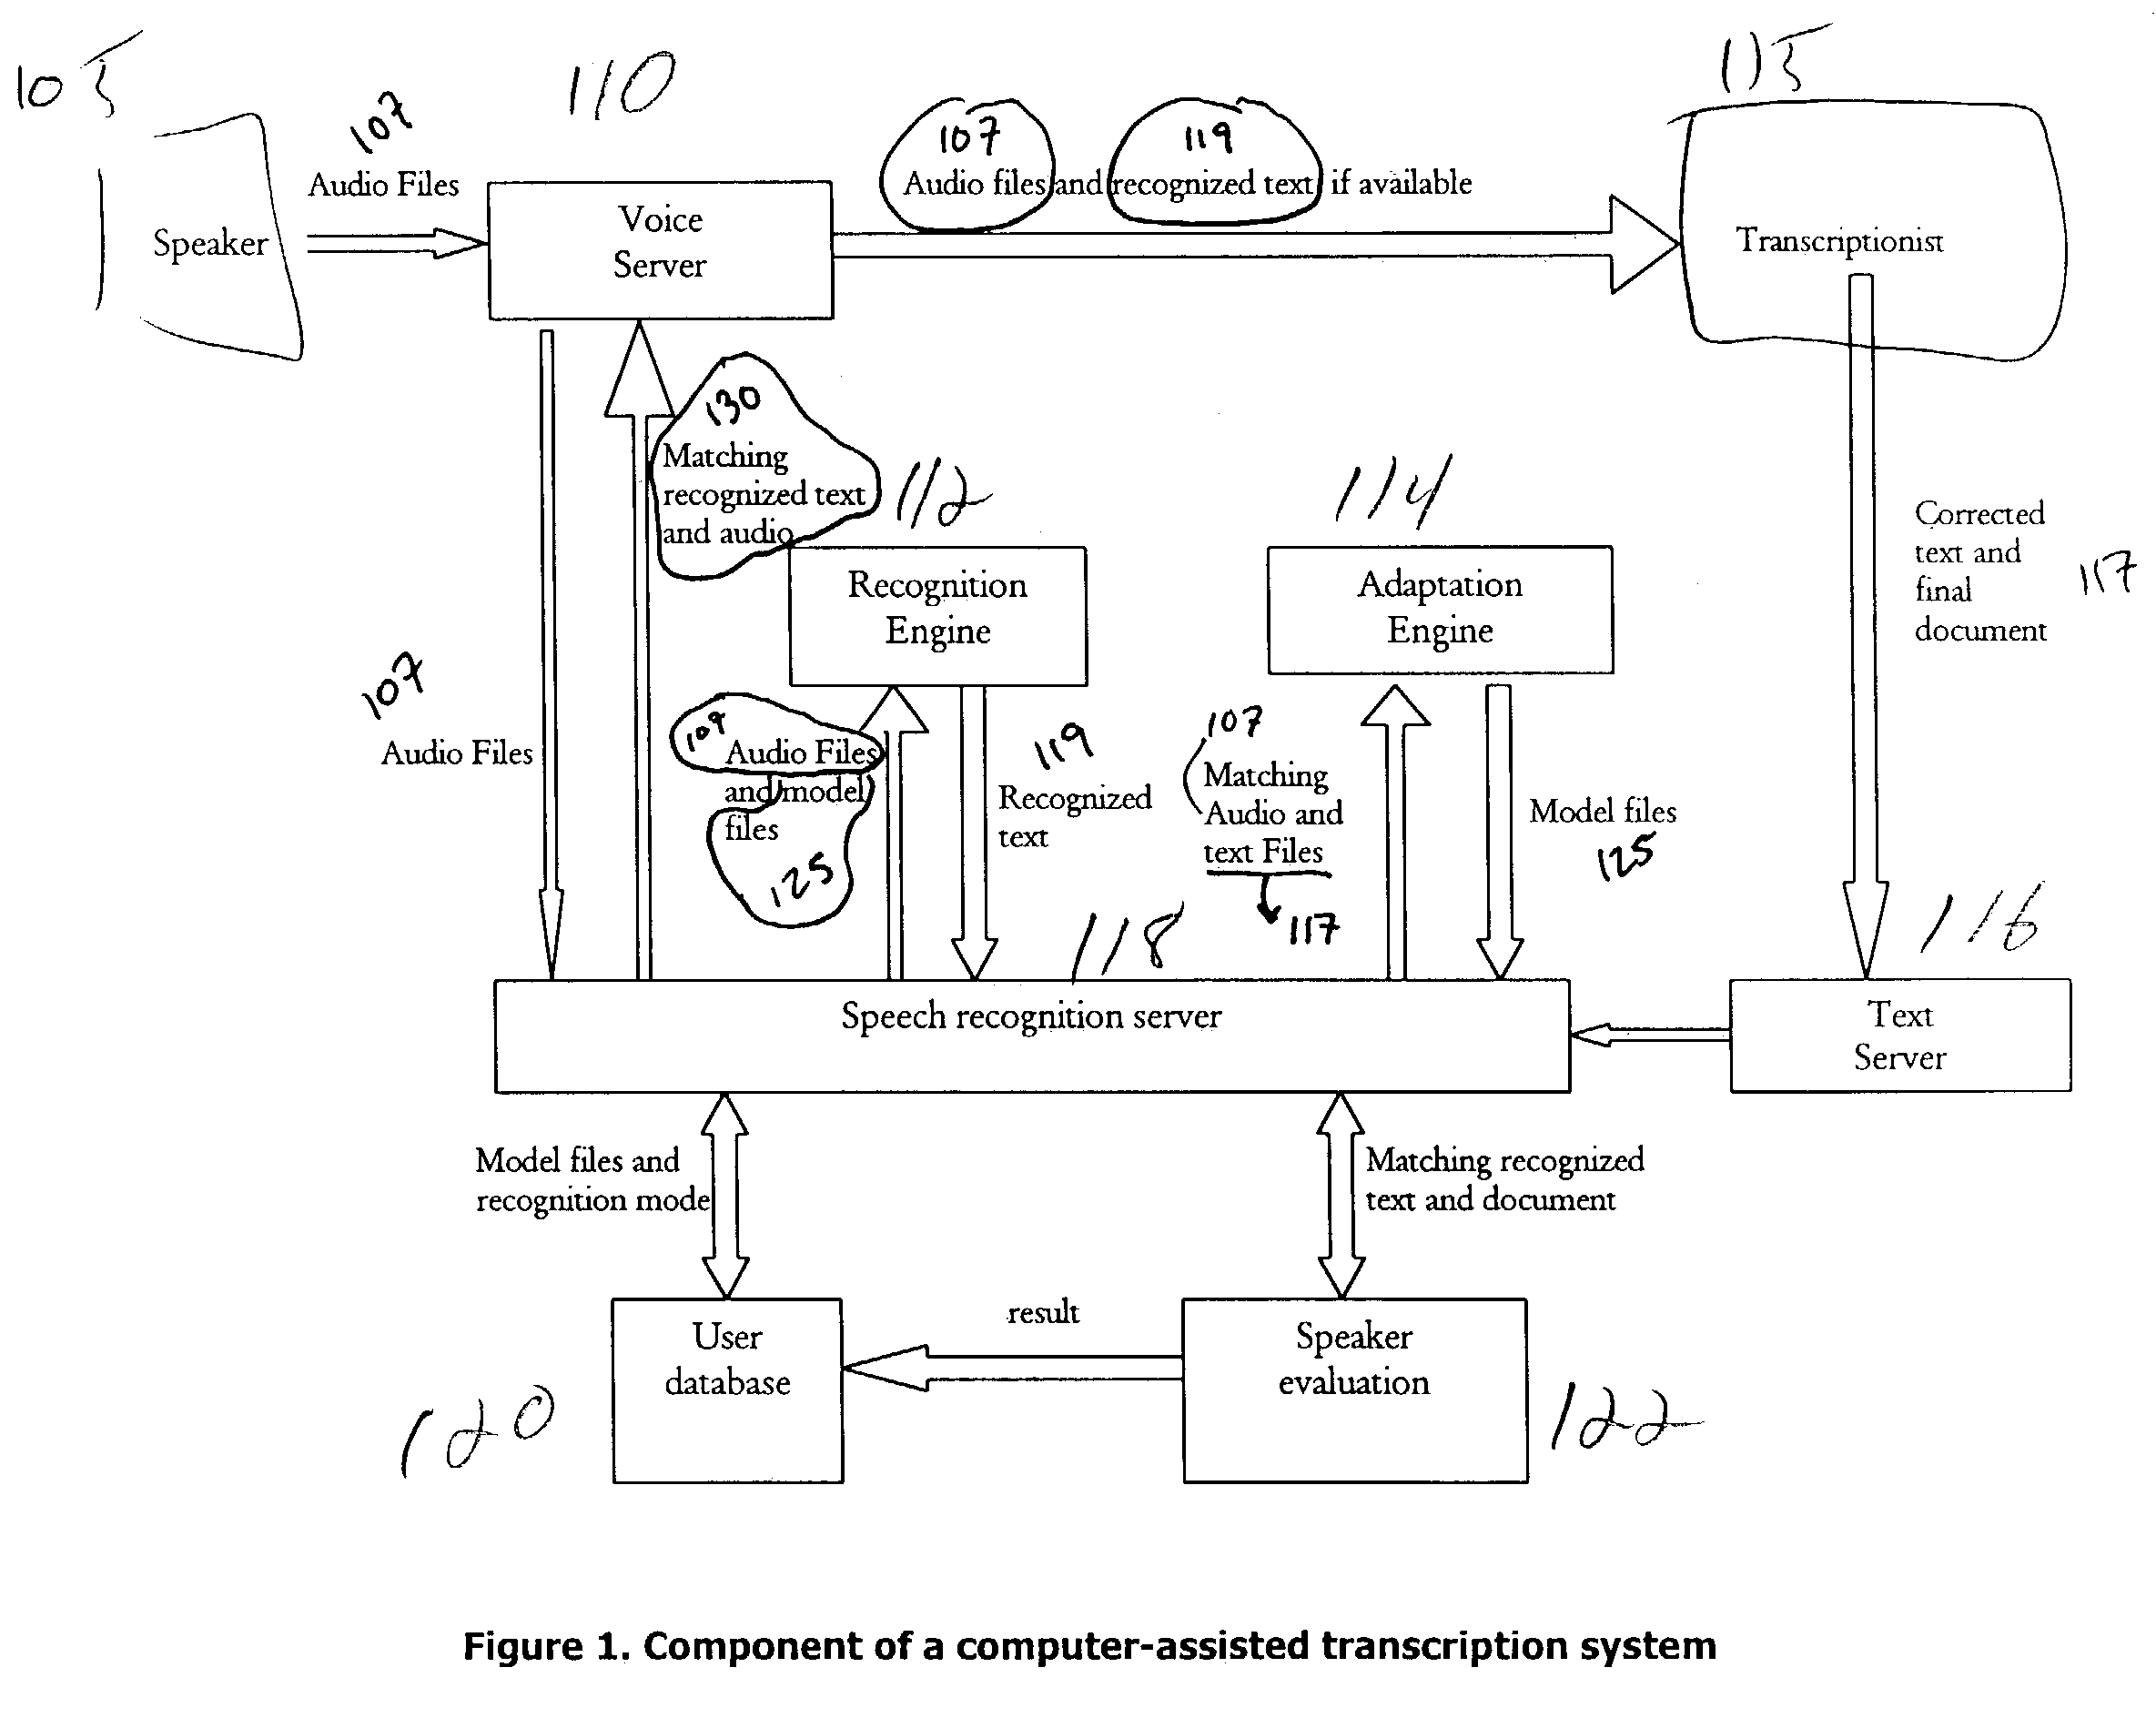 Systems and methods for automatic acoustic speaker adaptation in computer-assisted transcription systems